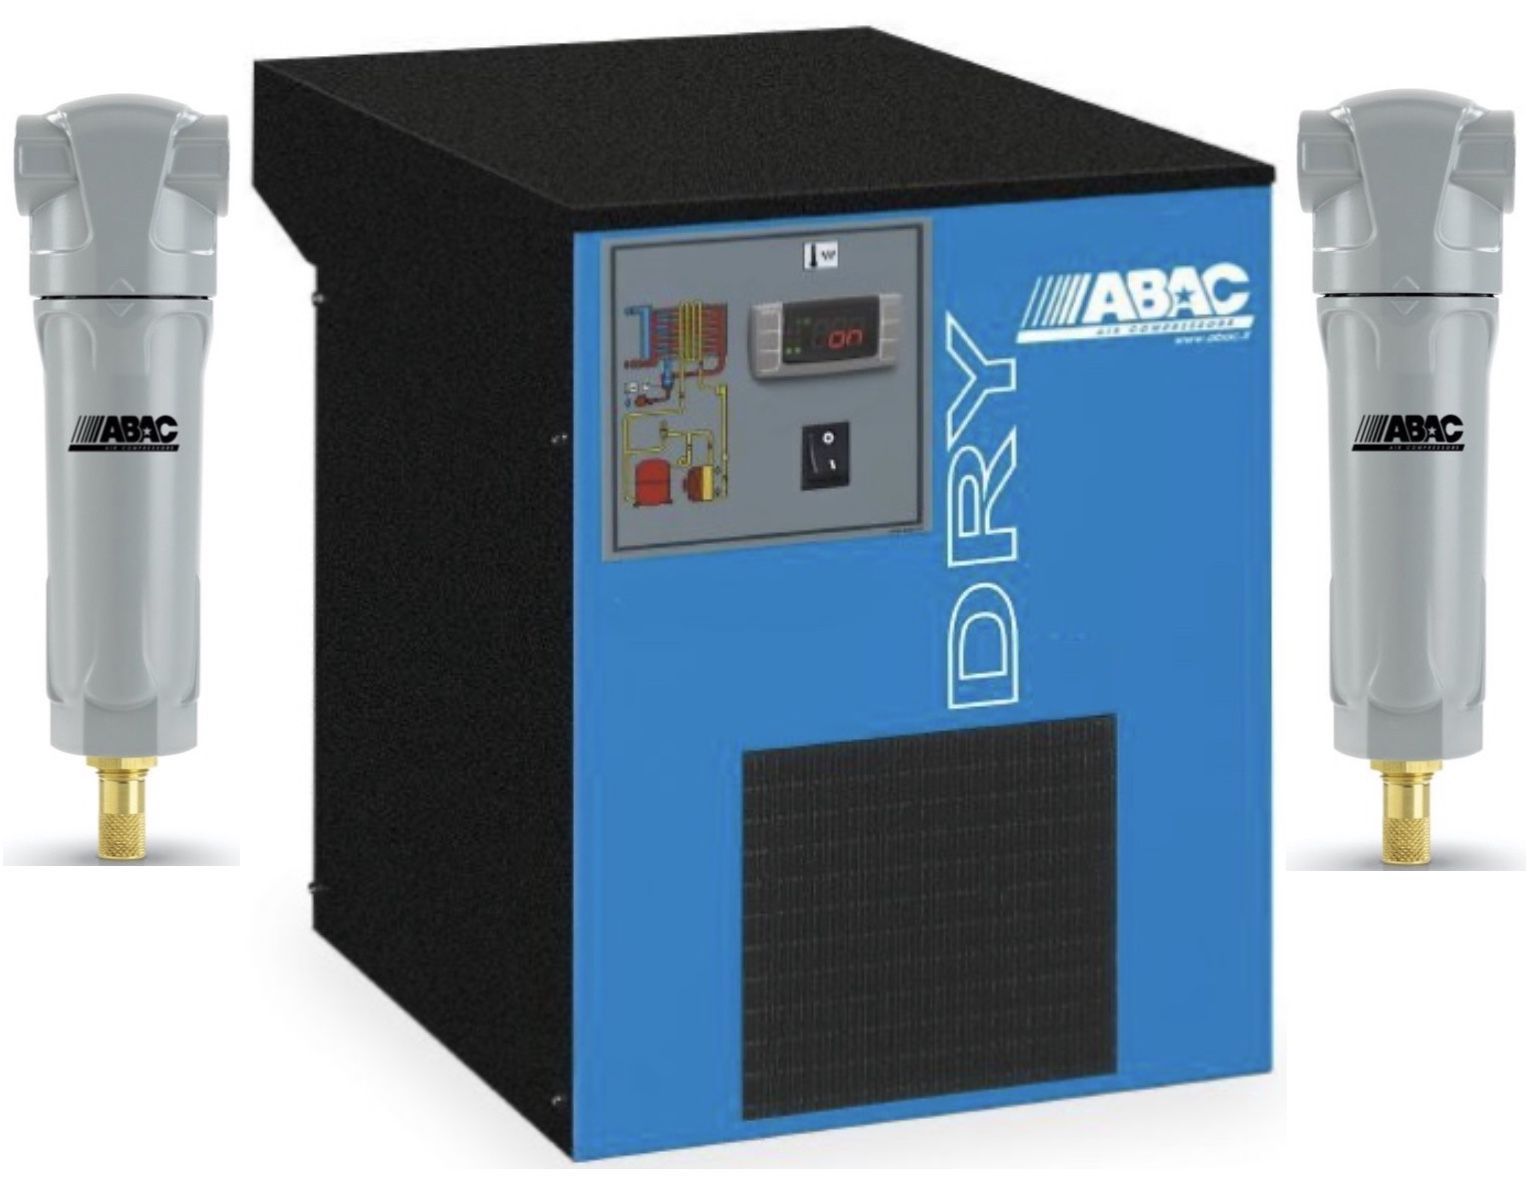 Abac Dry 45 + 2 X Filters 27 Cfm Refrigerated Dryer - 4102005871 Compressed Air